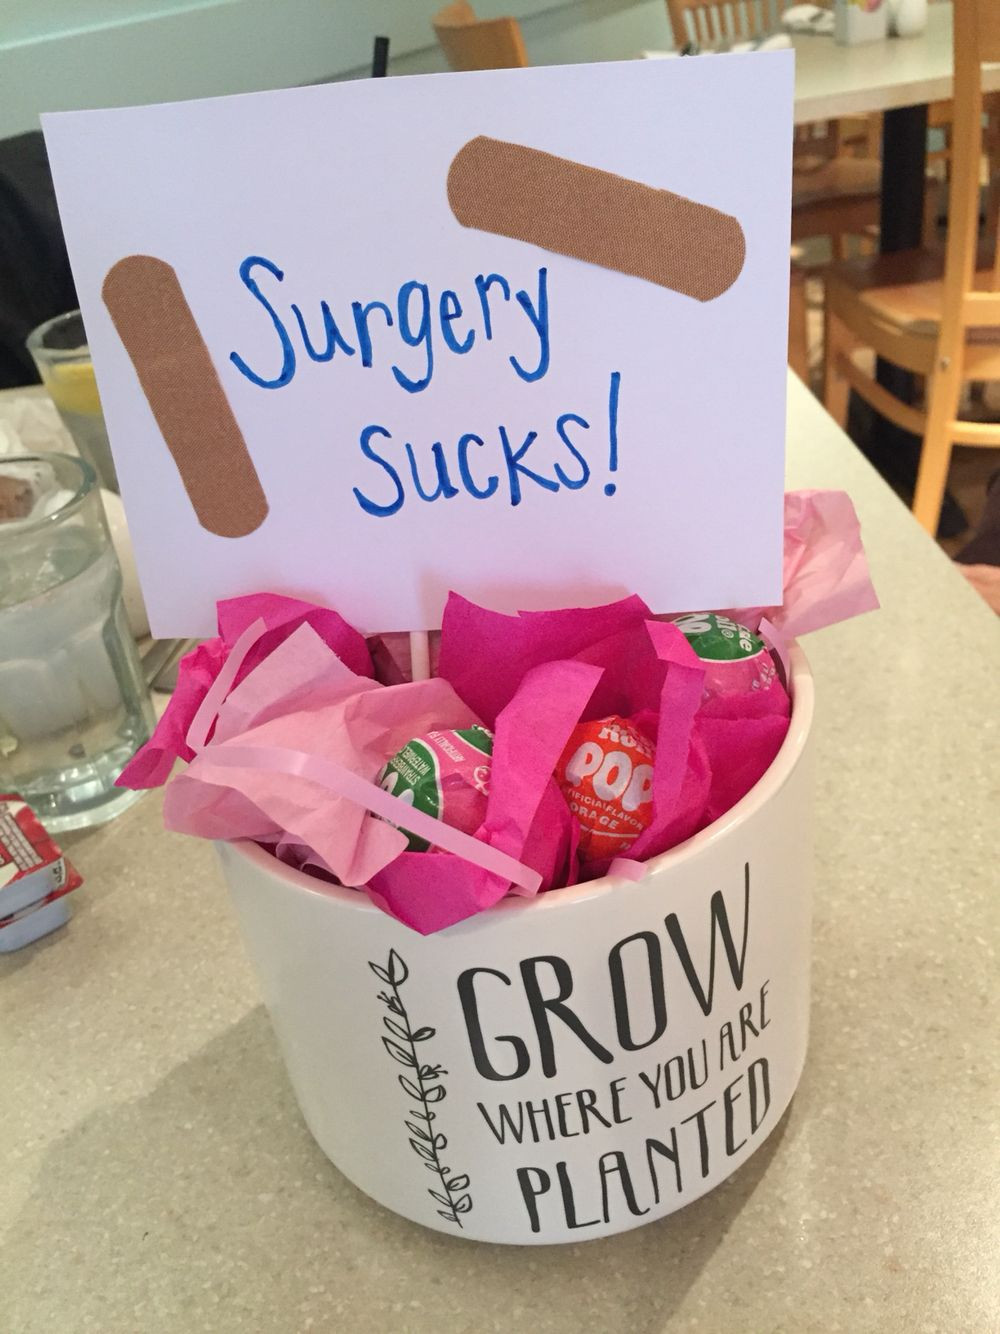 Get Well Gift Basket Ideas Surgery
 DIY t for friend family having surgery Fill vase with